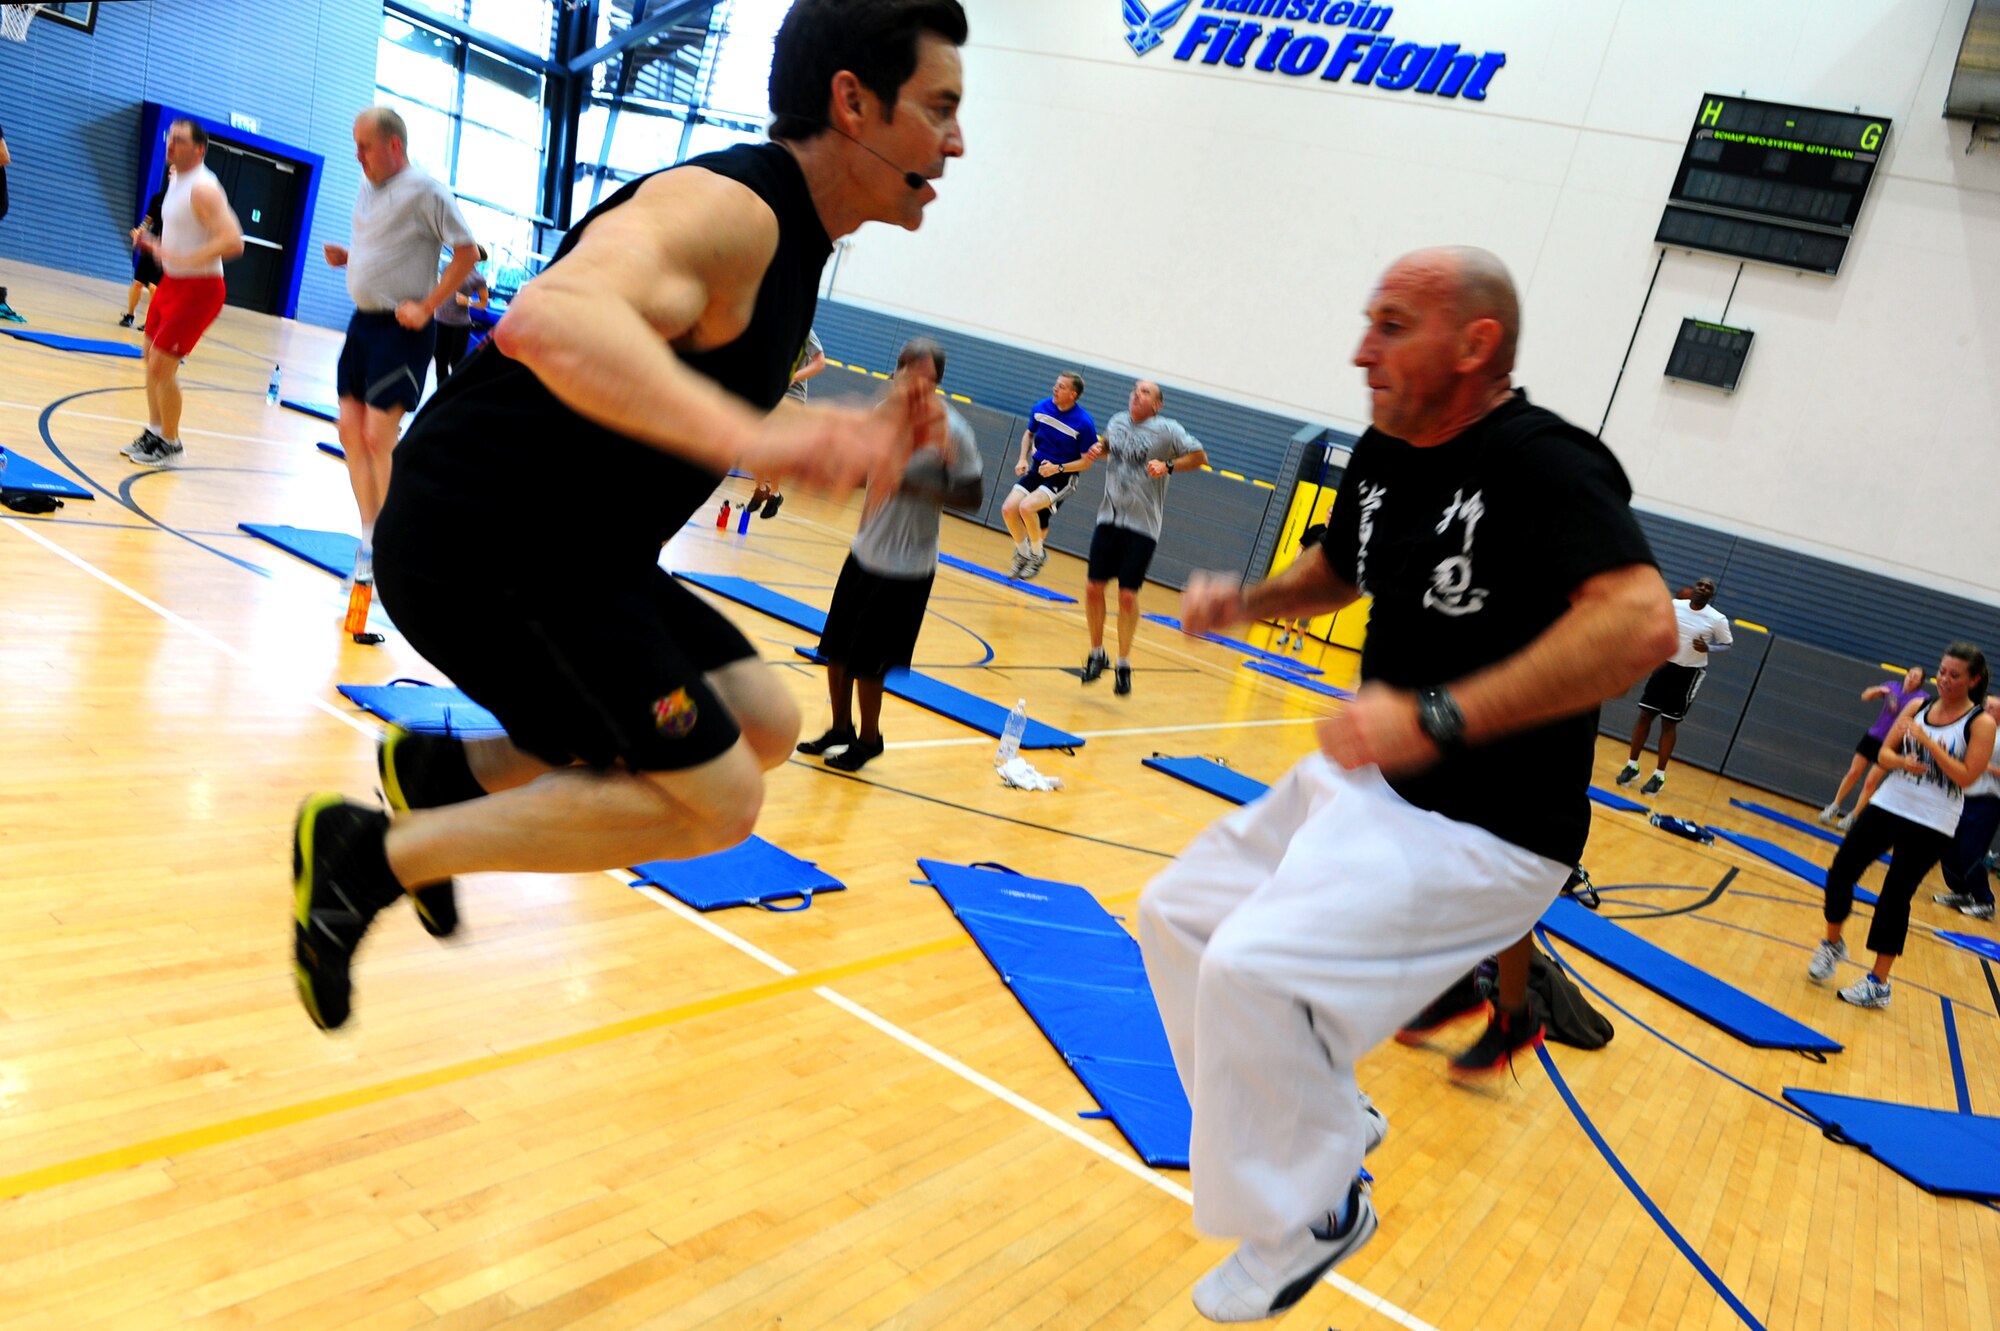 Tony Horton, creator of workout program P90X, motivates Paul Wagner, 886th Civil Engineer Squadron fire inspector, during a calisthenics routine at the southside gym, Ramstein Air Base, Germany, Oct. 7, 2011. Horton conducted two free strength training workout sessions for 325 military personnel and dependents. (U.S. Air Force photo by Airman 1st Class Brea Miller)